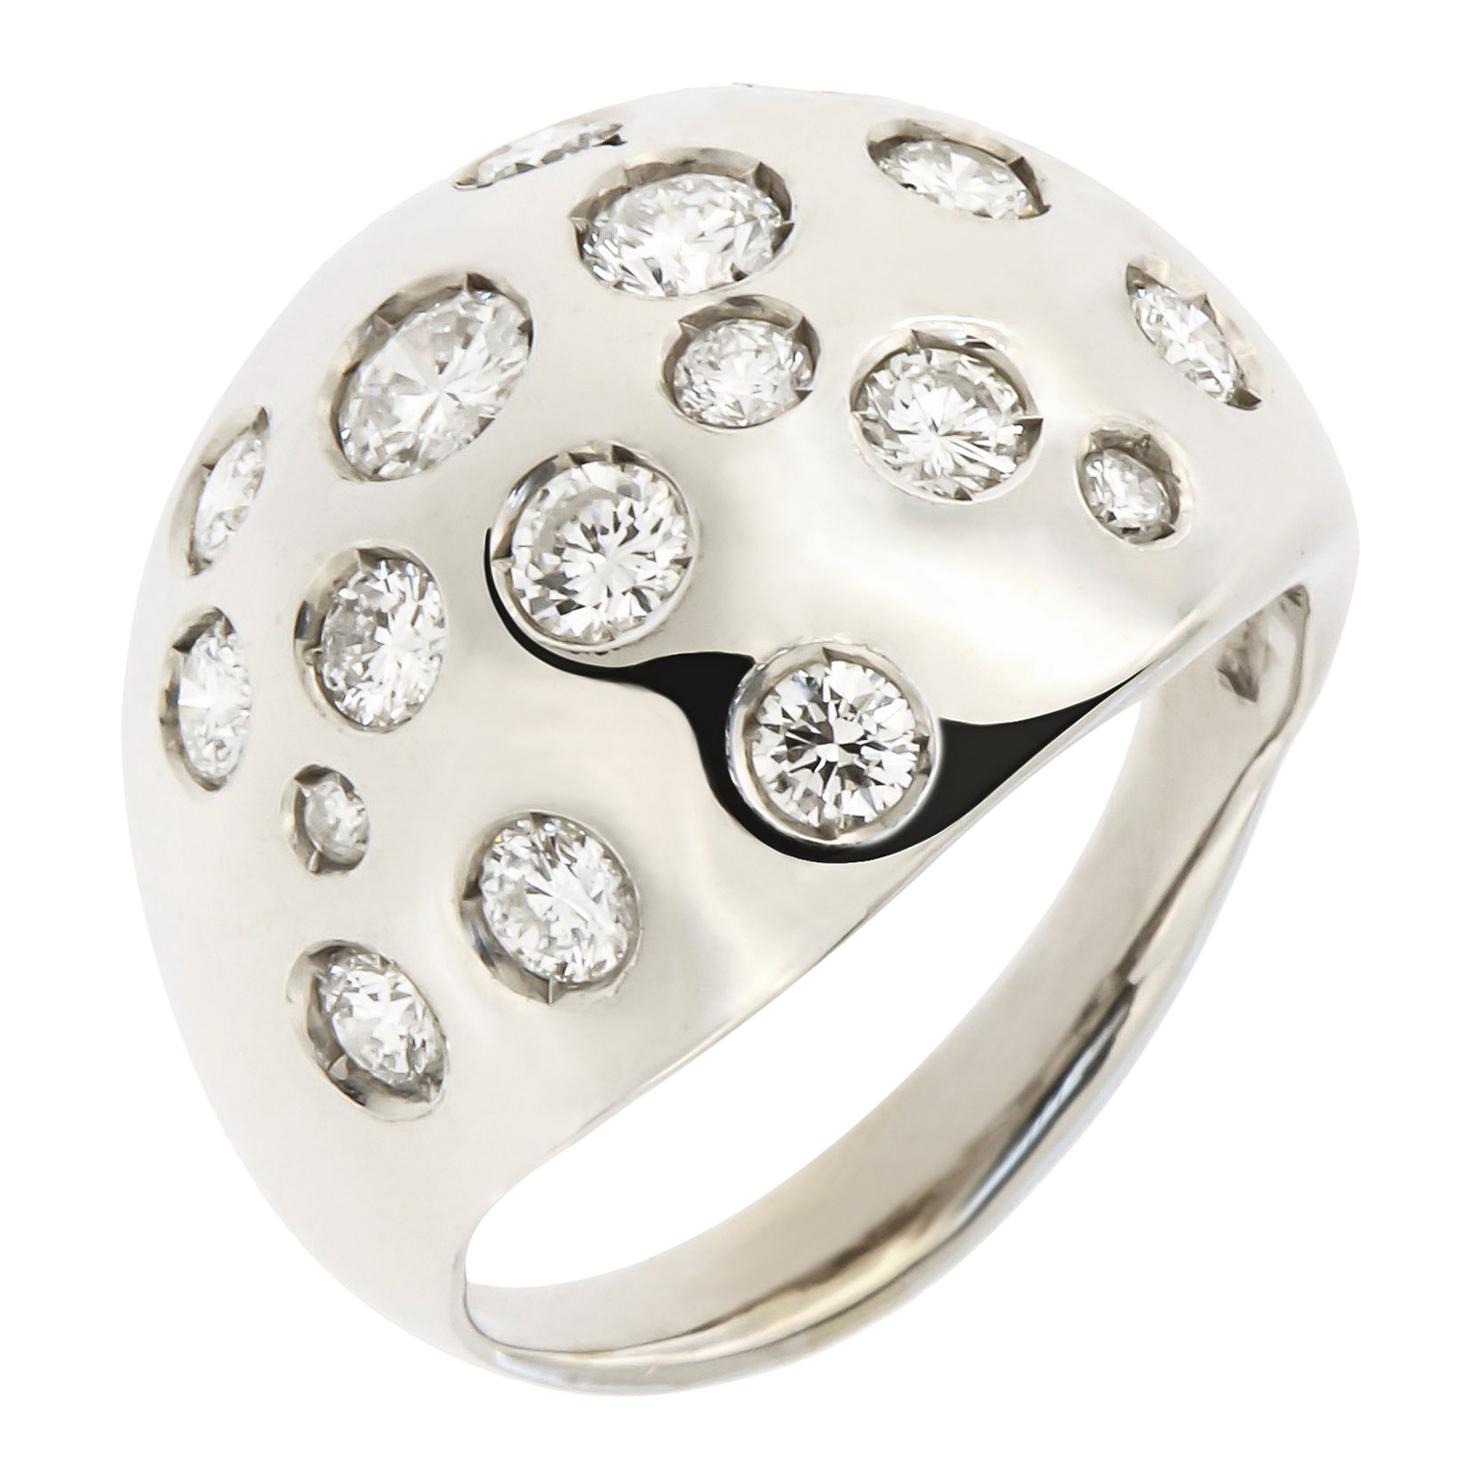 Diamonds 18 Karat White Gold Cocktail Ring Handcrafted in Italy